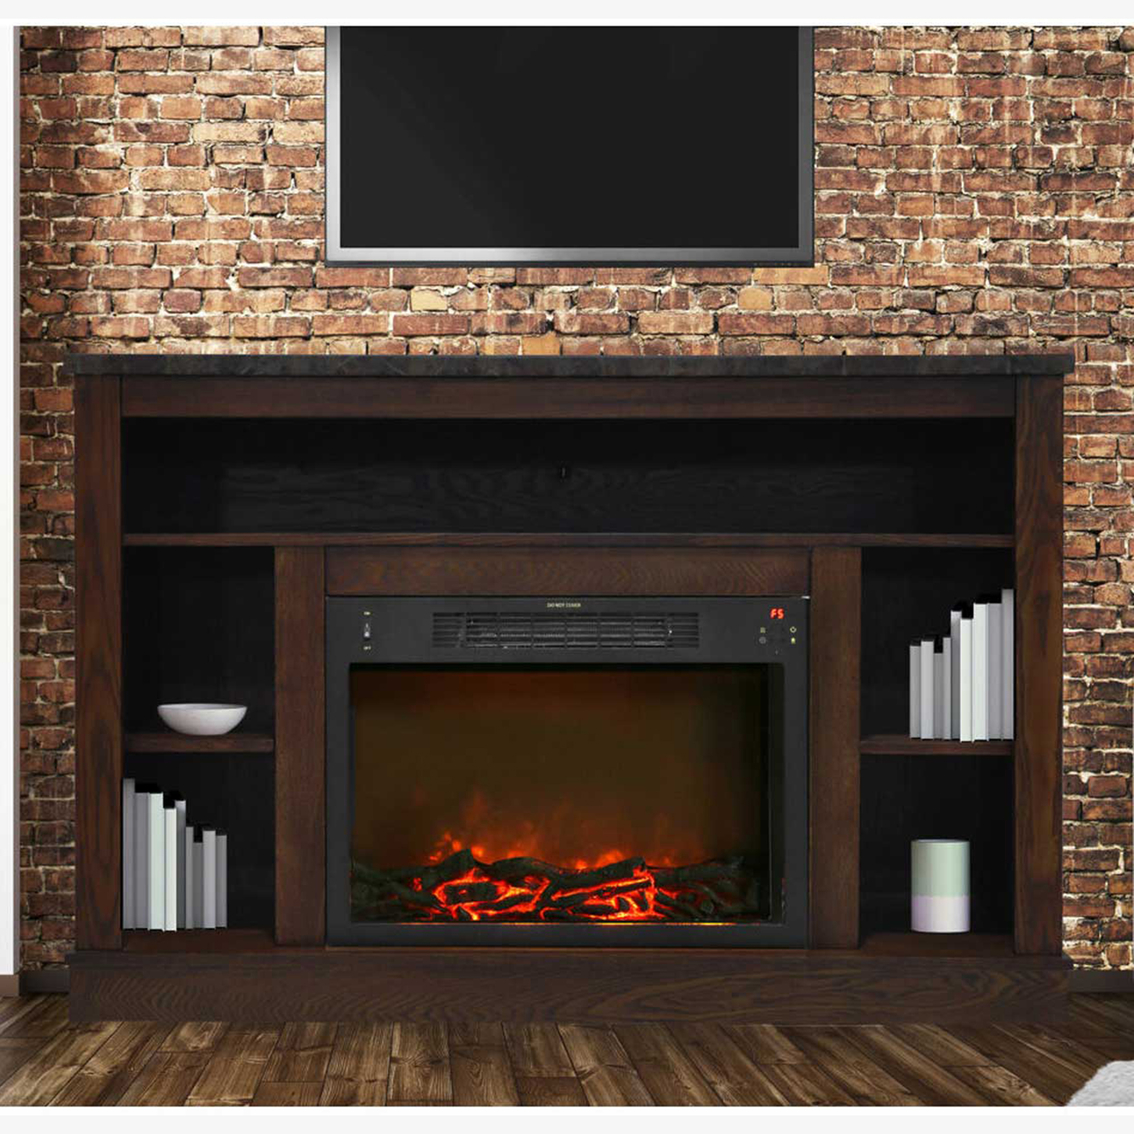 Cambridge Seville 47 in. Electric Fireplace Heater with Mahogany Mantel - Image 2 of 7